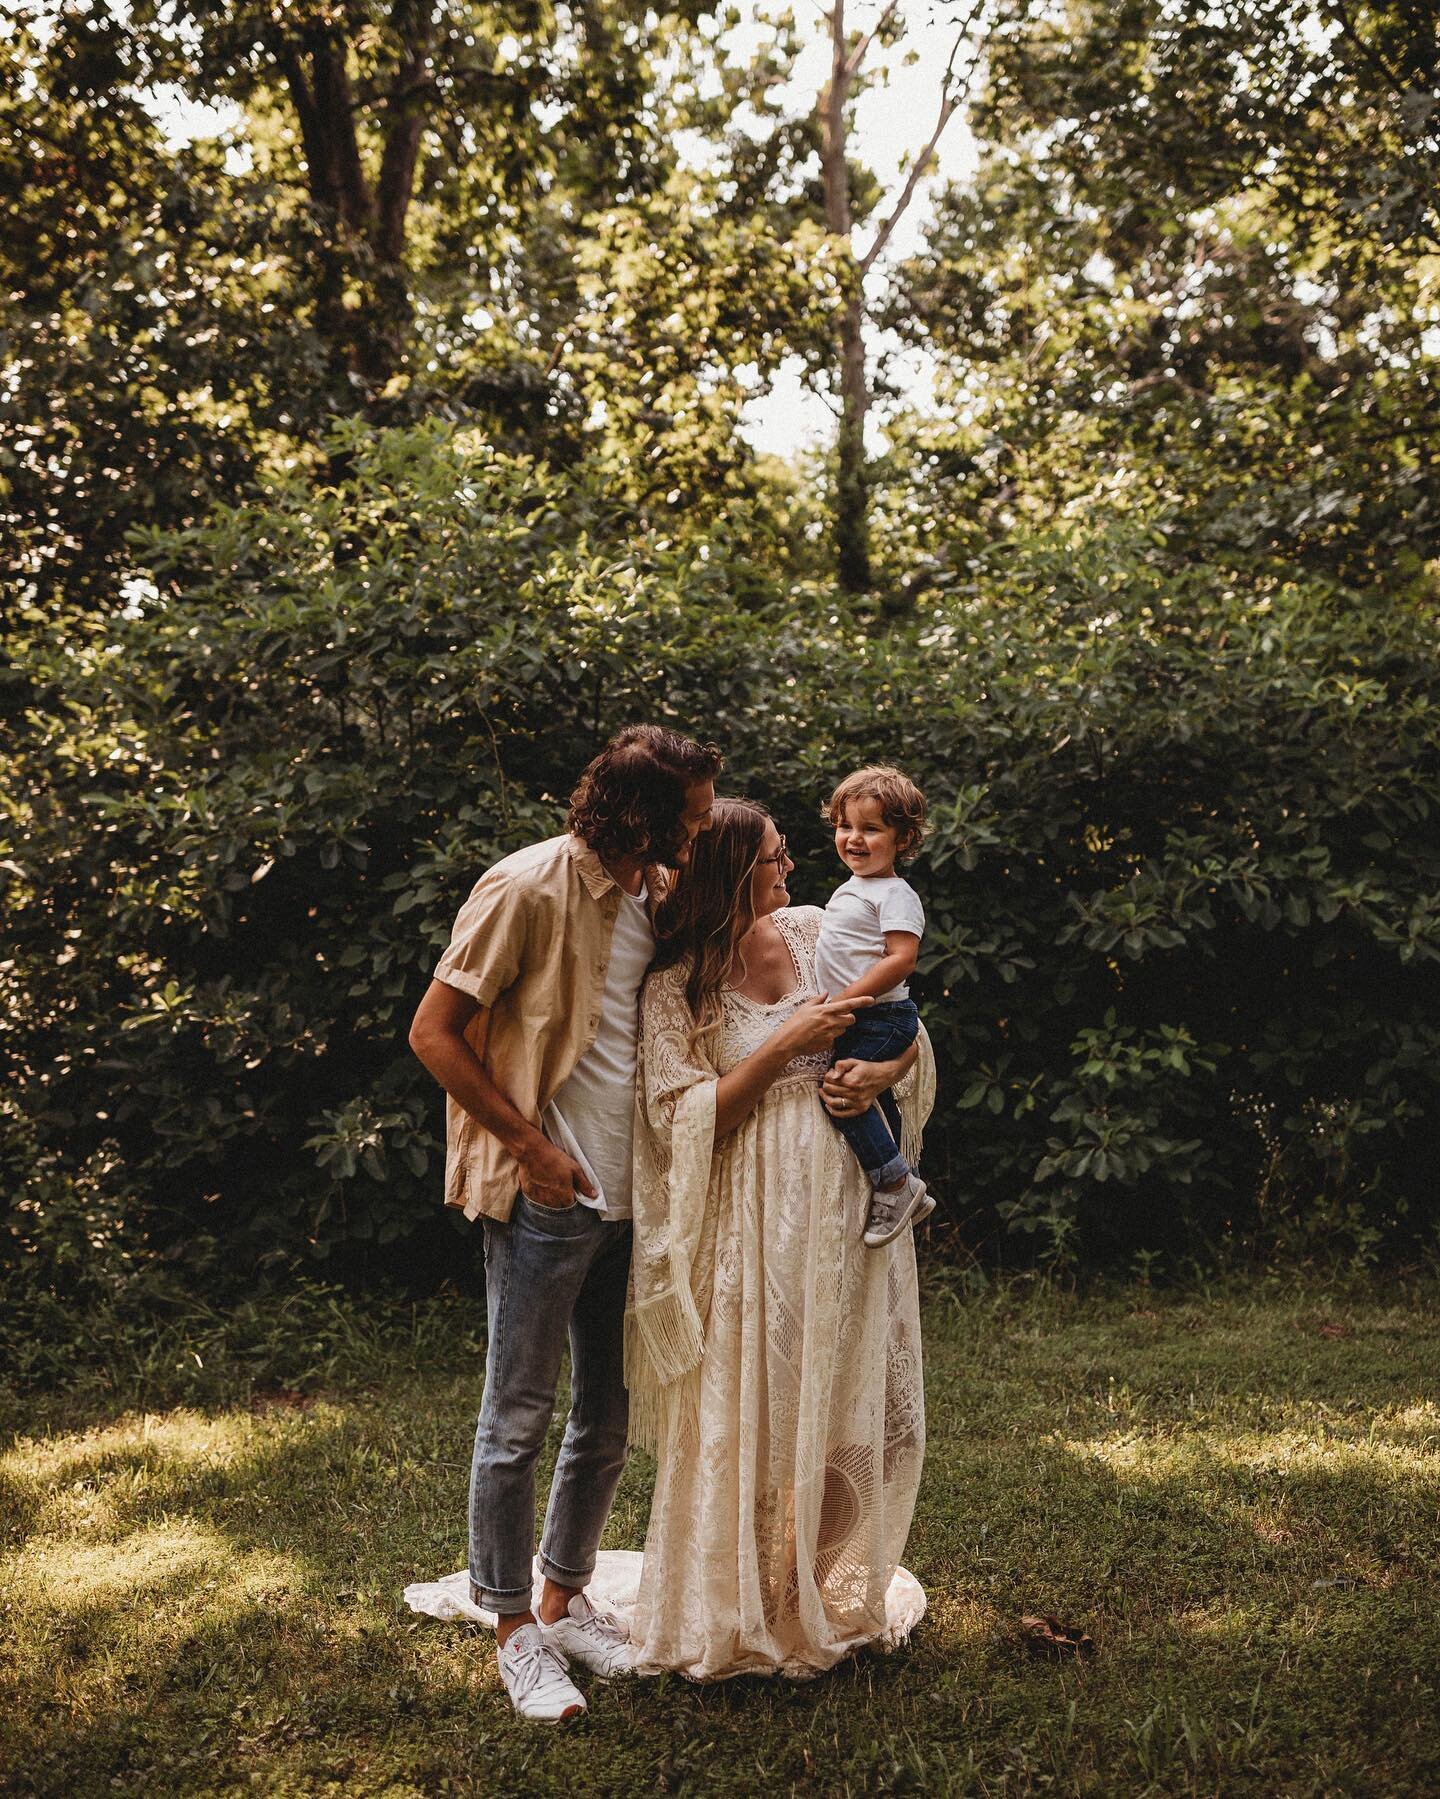 We had the cutest family maternity session with @mikaylaahlvers and @cameronahlvers of @camandmikayla 💕

We met in Greenville to trade maternity sessions as they celebrated welcoming their second child and we celebrate our first coming soon!

It was